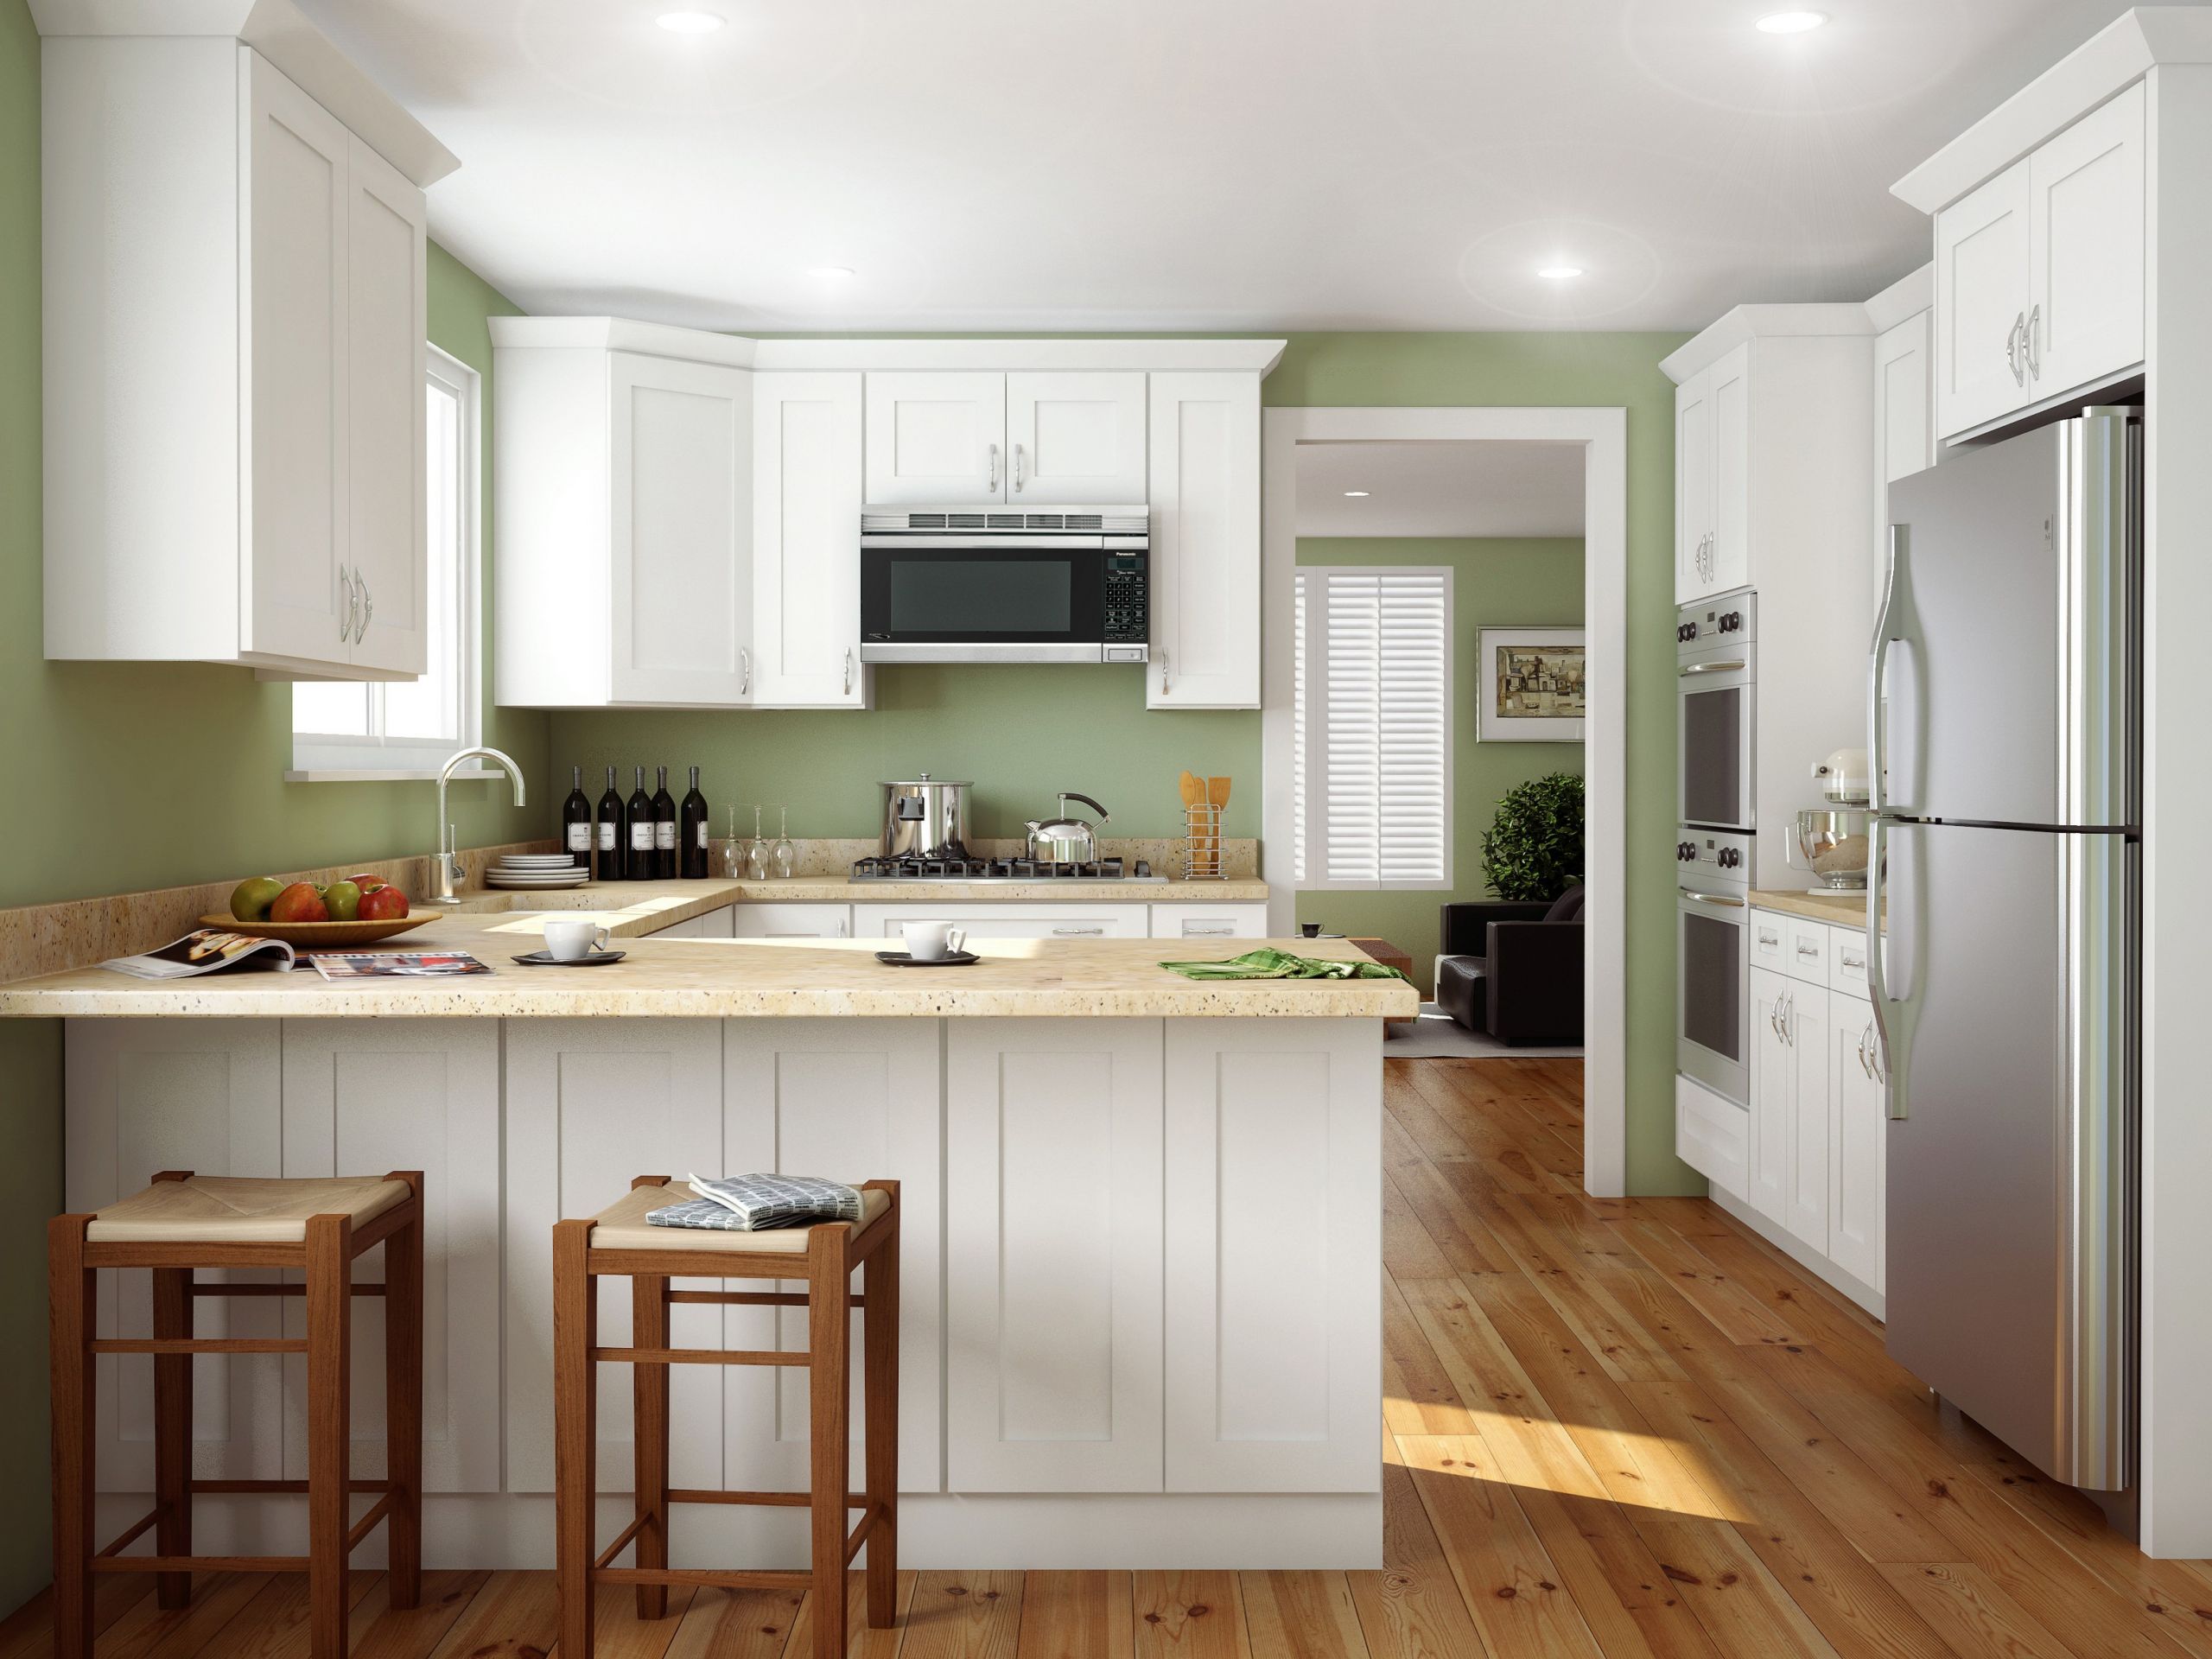 White Kitchen Cabinets Design
 5 mon Kitchen Design Problems To Fix During Your Remodel